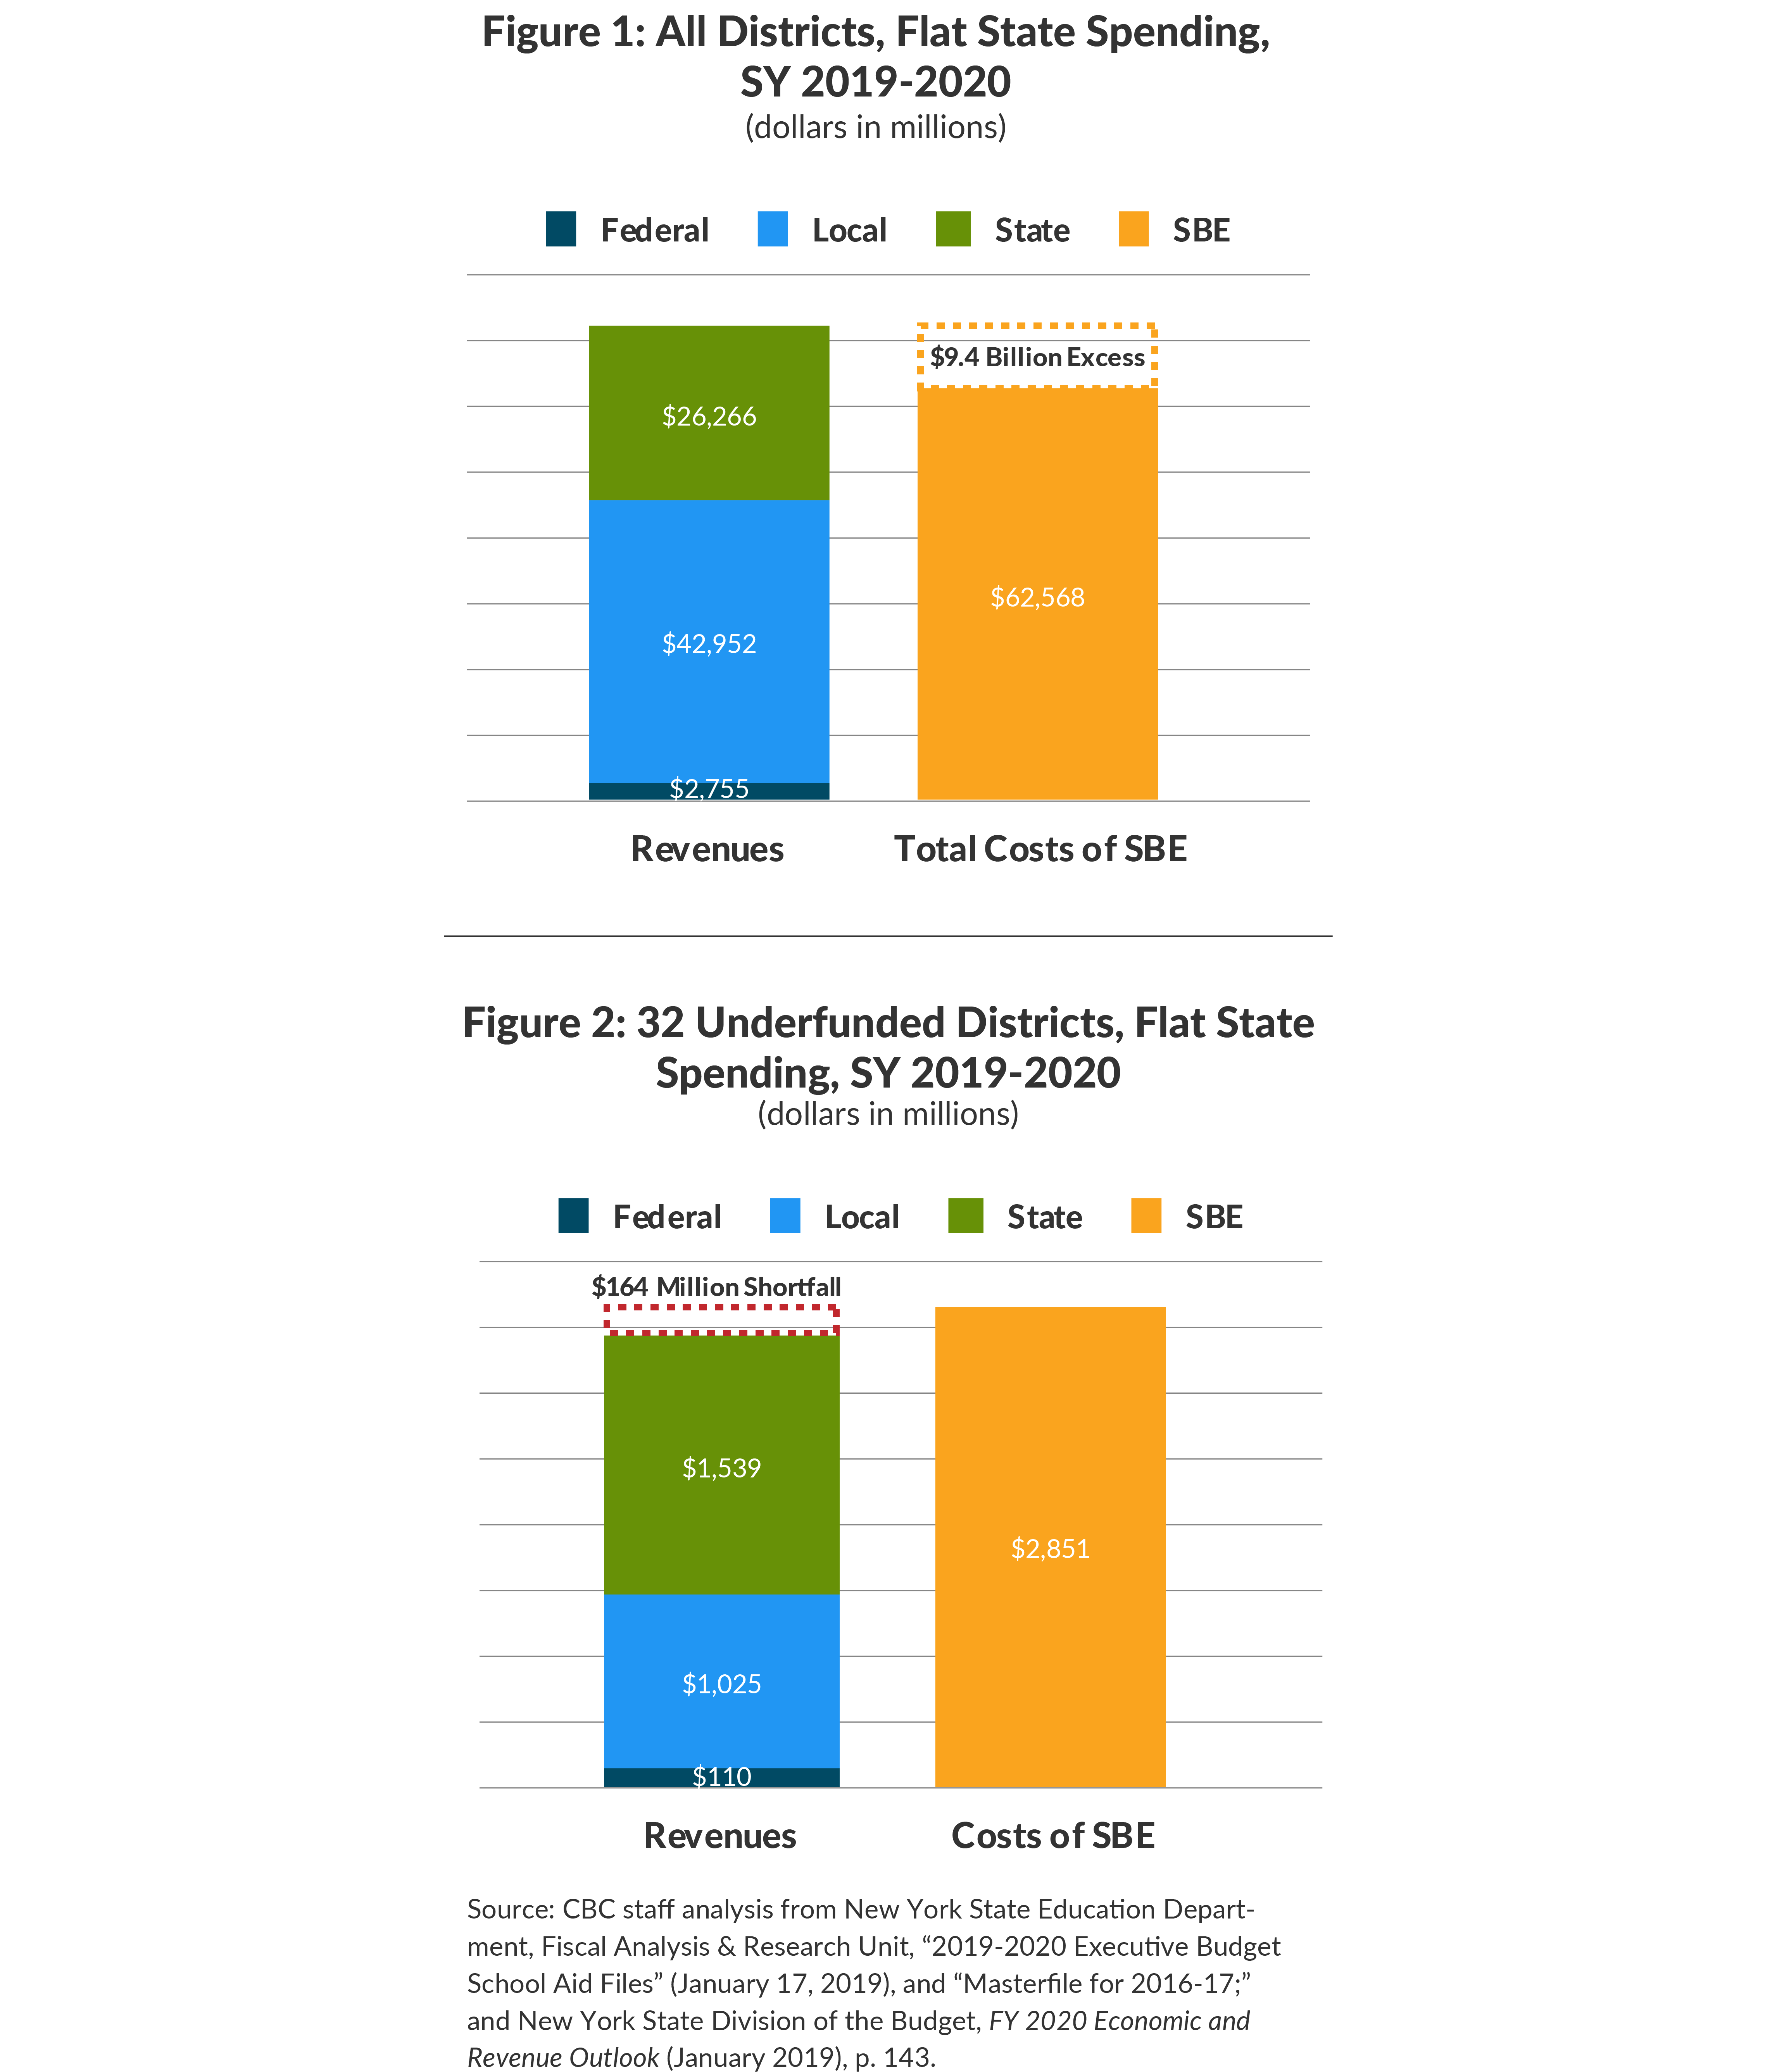 Figure1 and 2: All Districts vs. Underfunded Districts, Flate State Spending